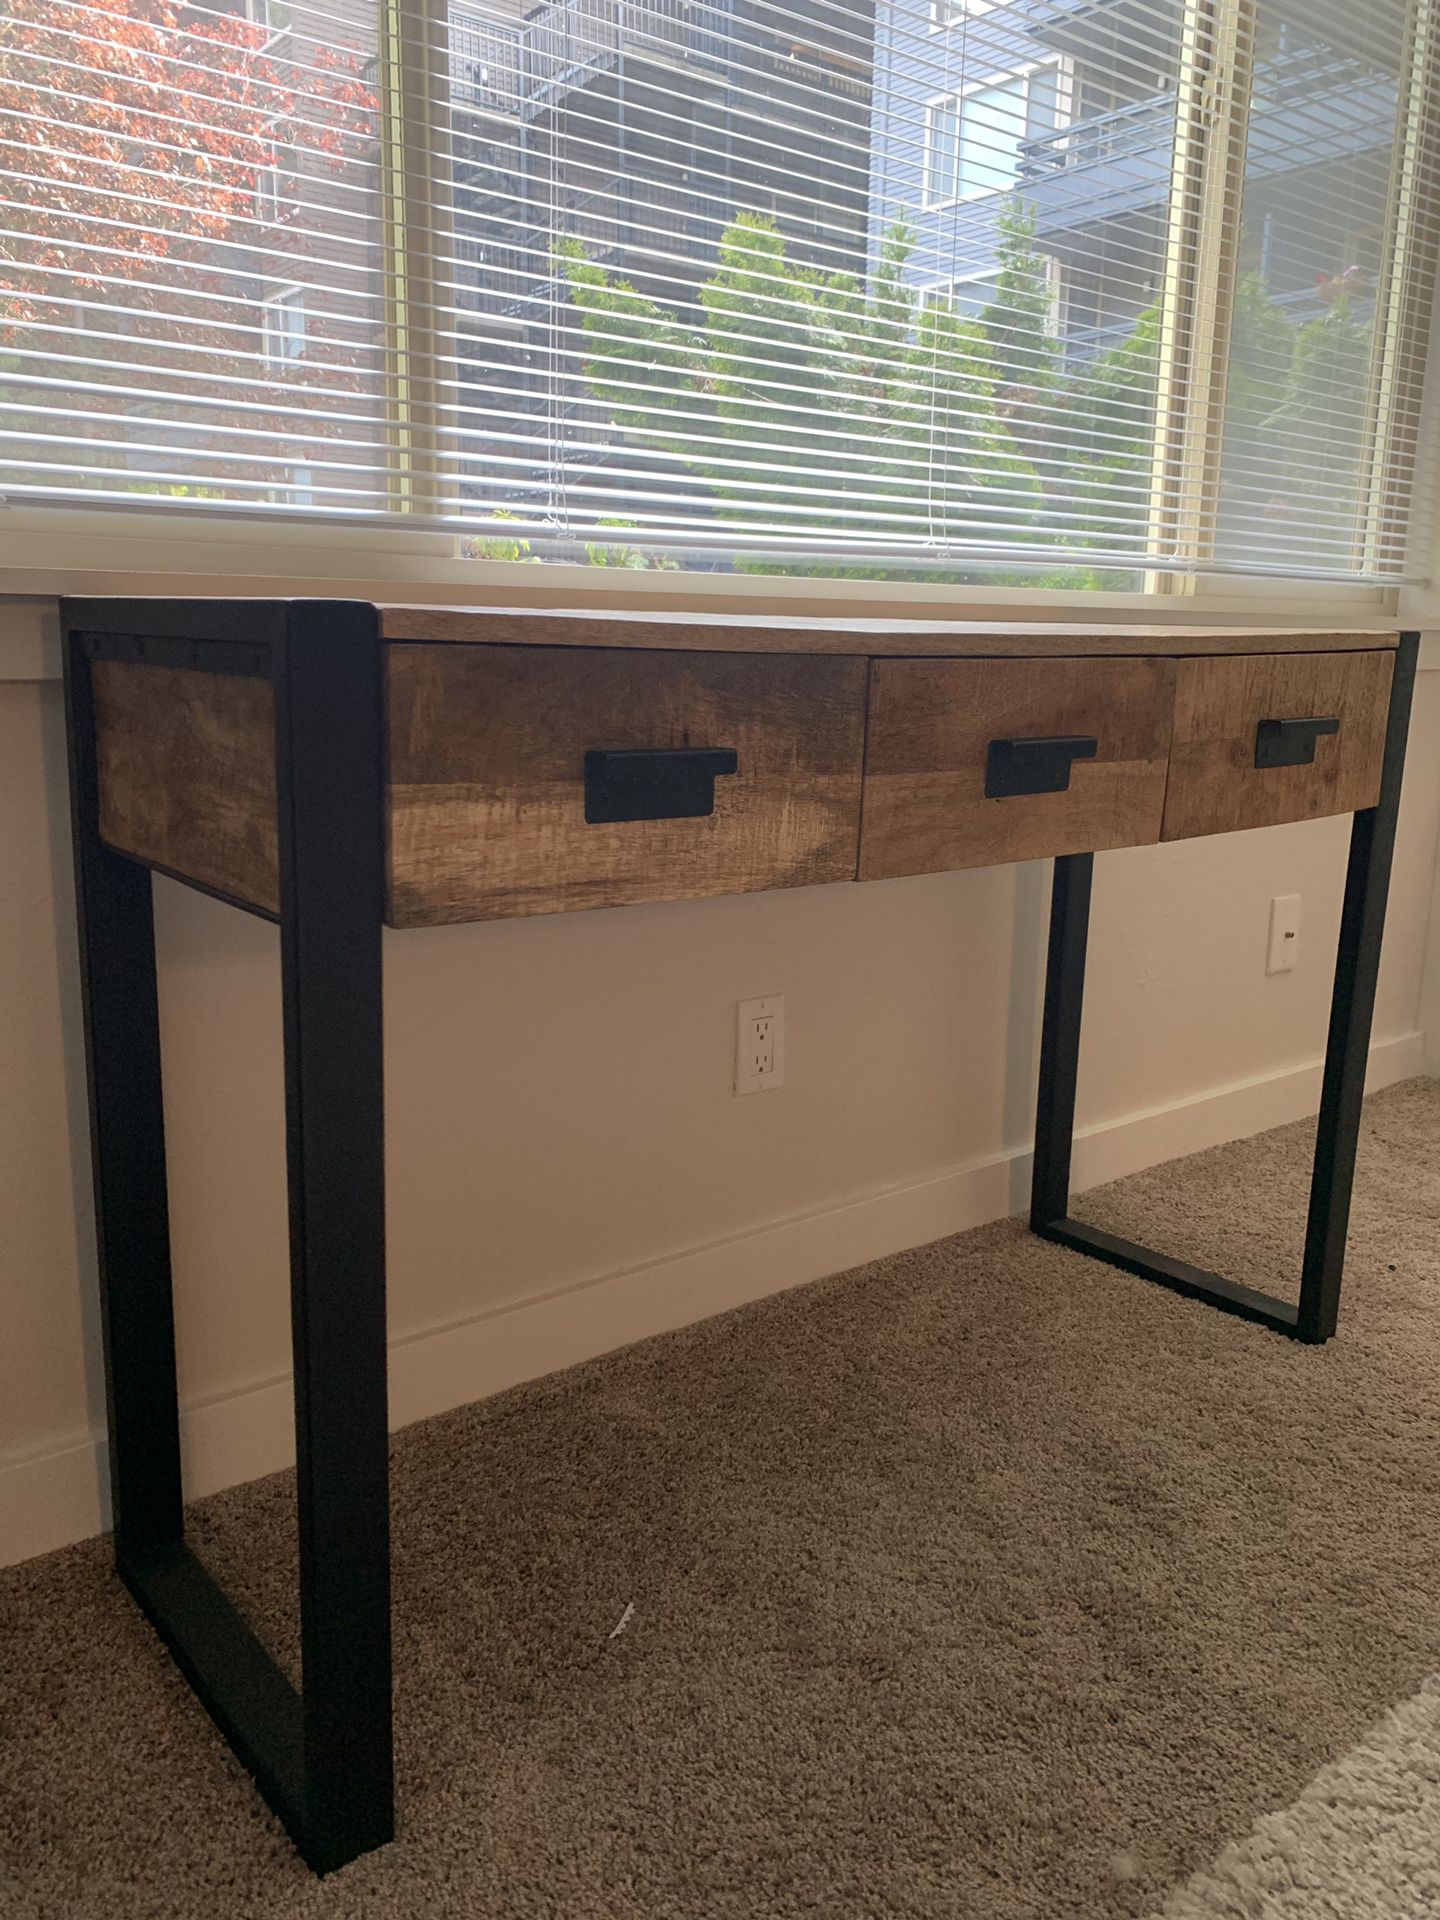 Entry Console Table